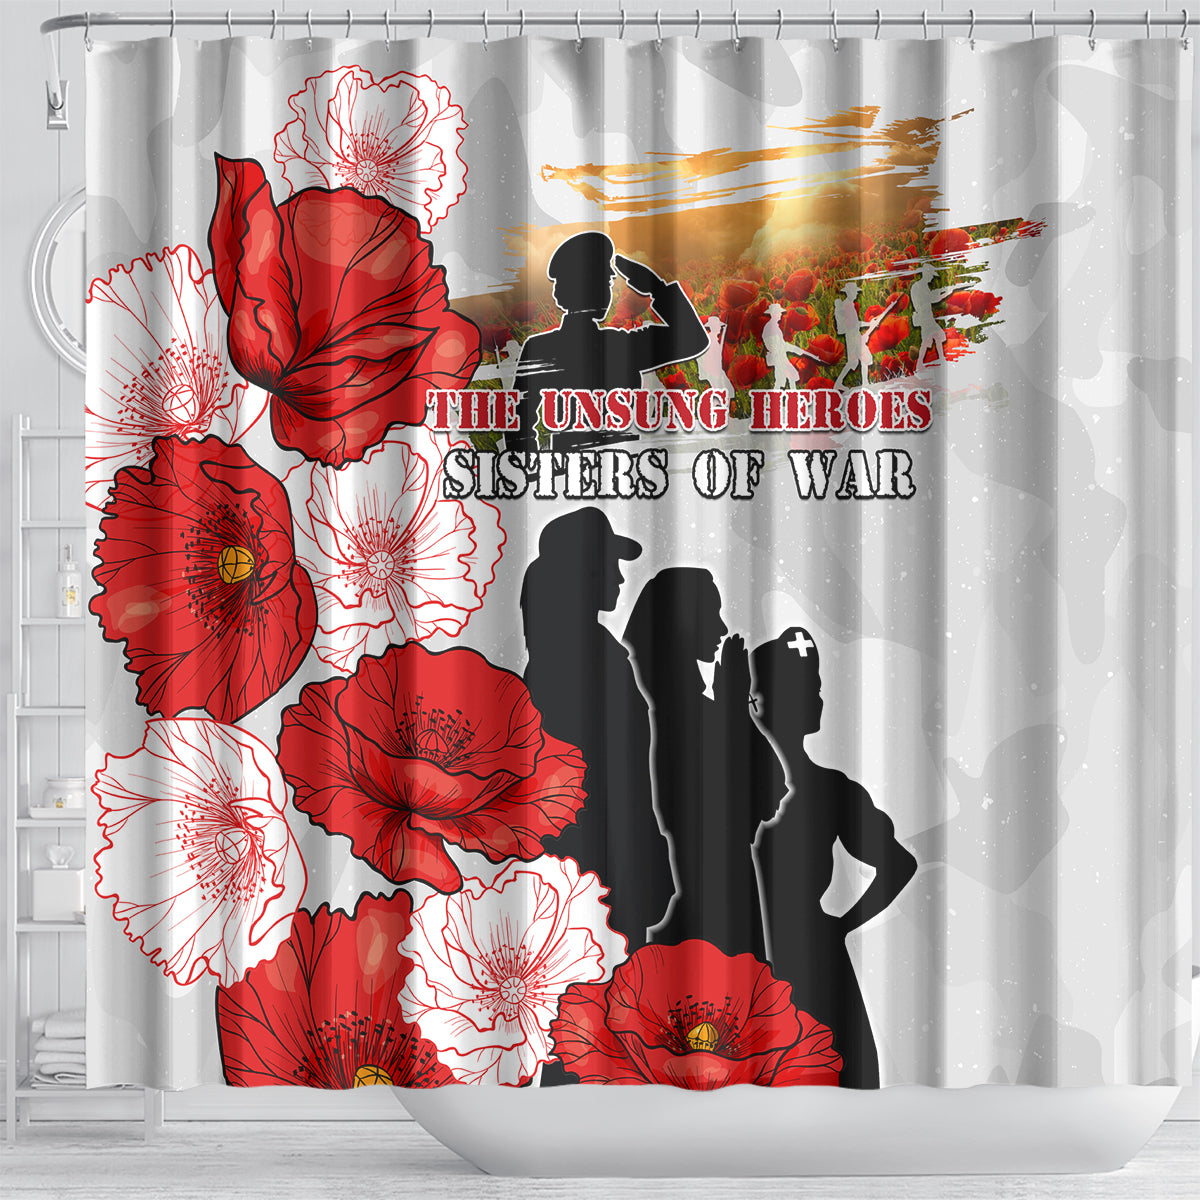 New Zealand ANZAC Day Shower Curtain The Unsung Heroes Sisters of War